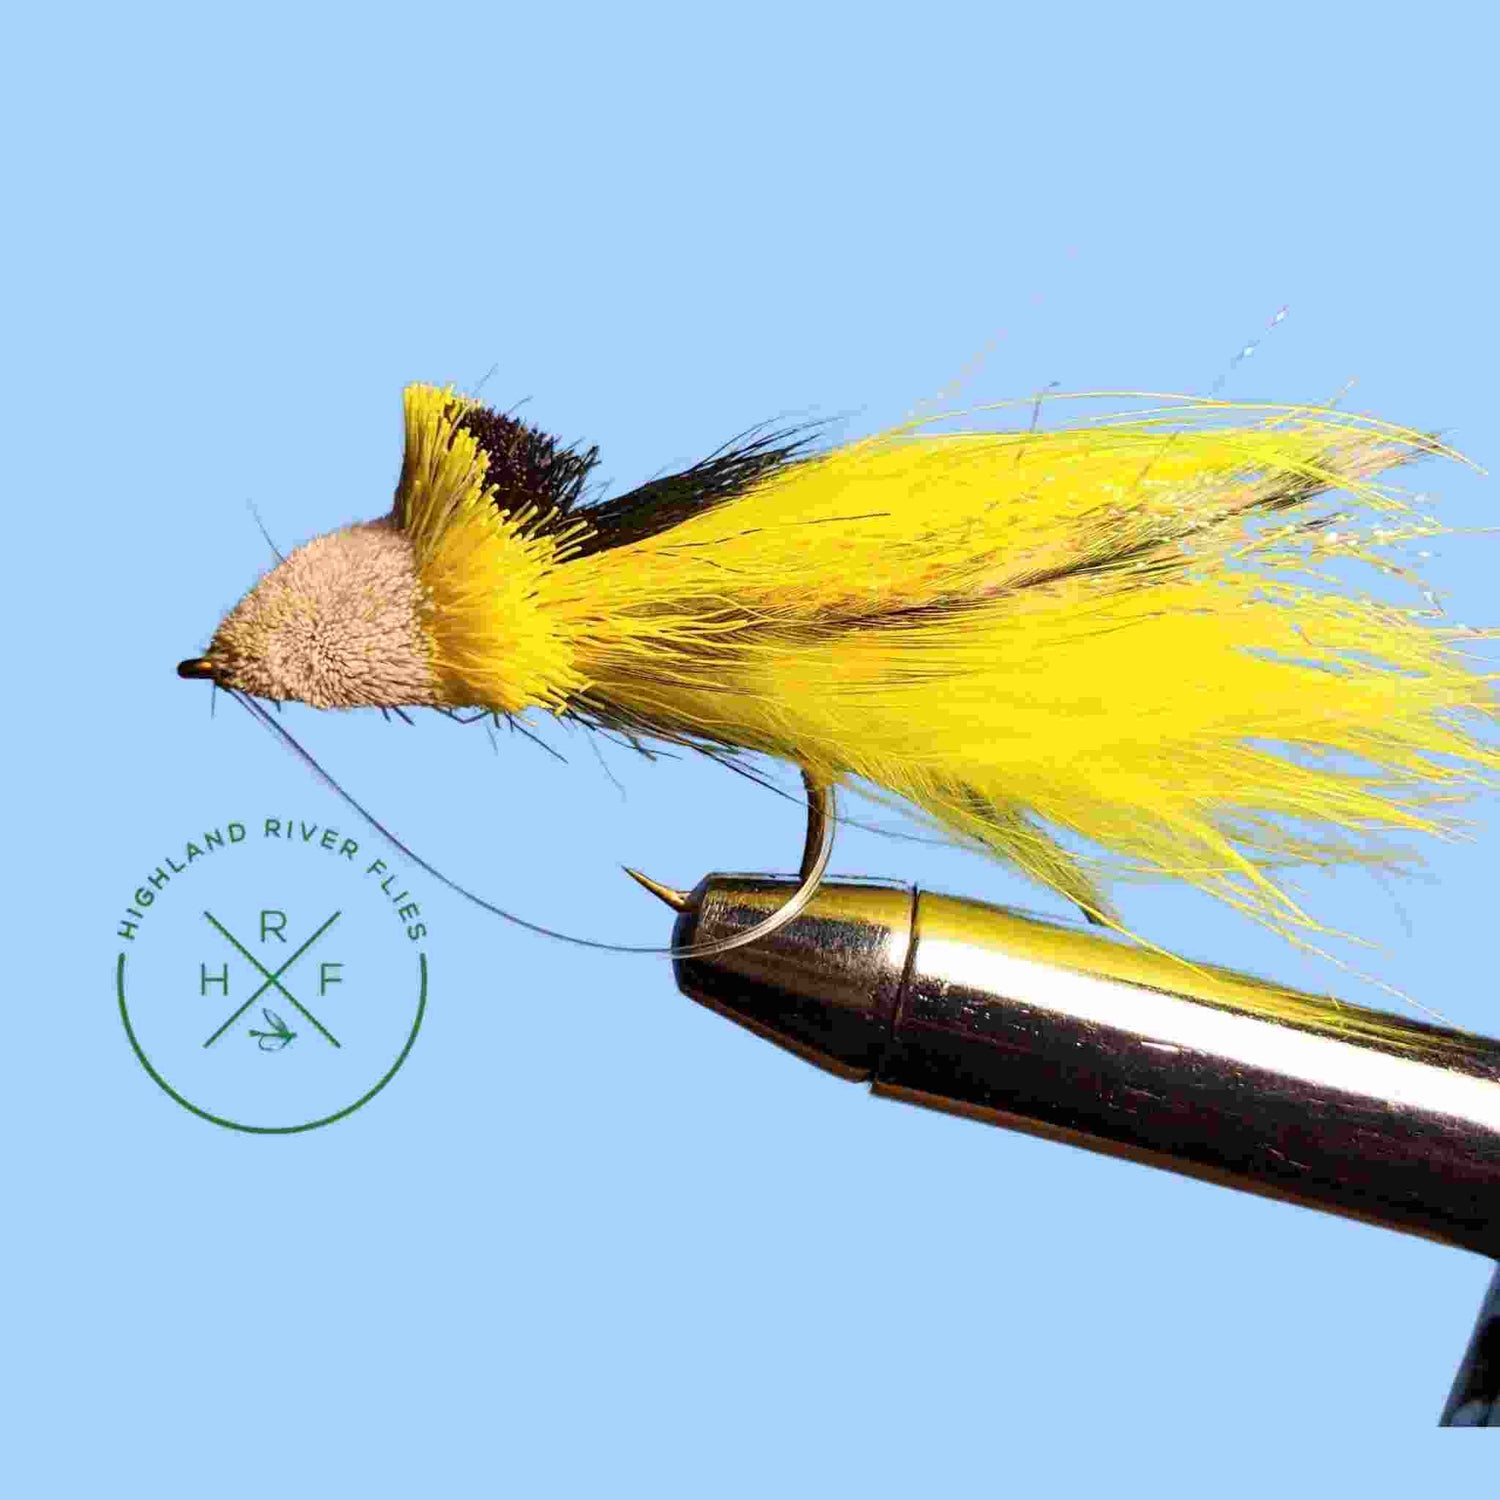 Fly Fishing Flies by Colorado Fly Supply - Nuclear Egg - Fly Fishing Gifts  - 3-Pack of Flies - Eggs Lures for Trout Salmon Bass Bluegill Steelhead and